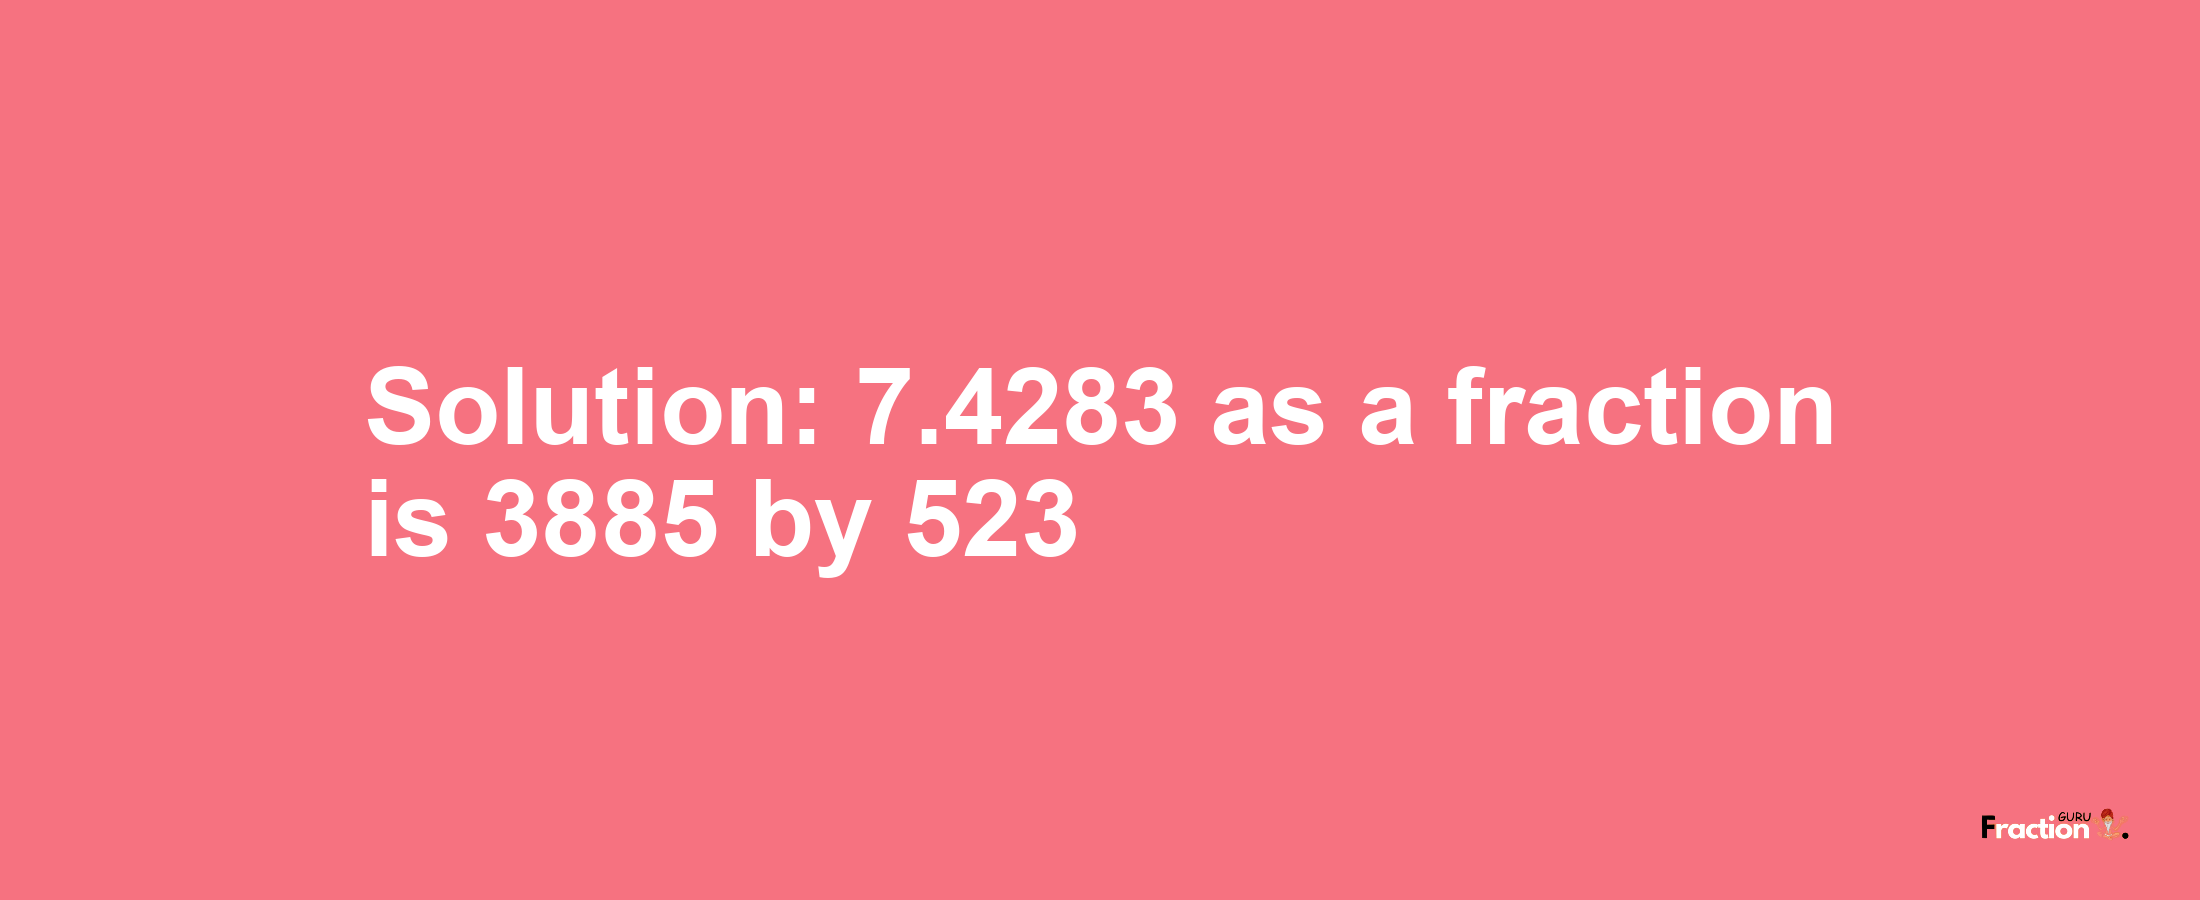 Solution:7.4283 as a fraction is 3885/523